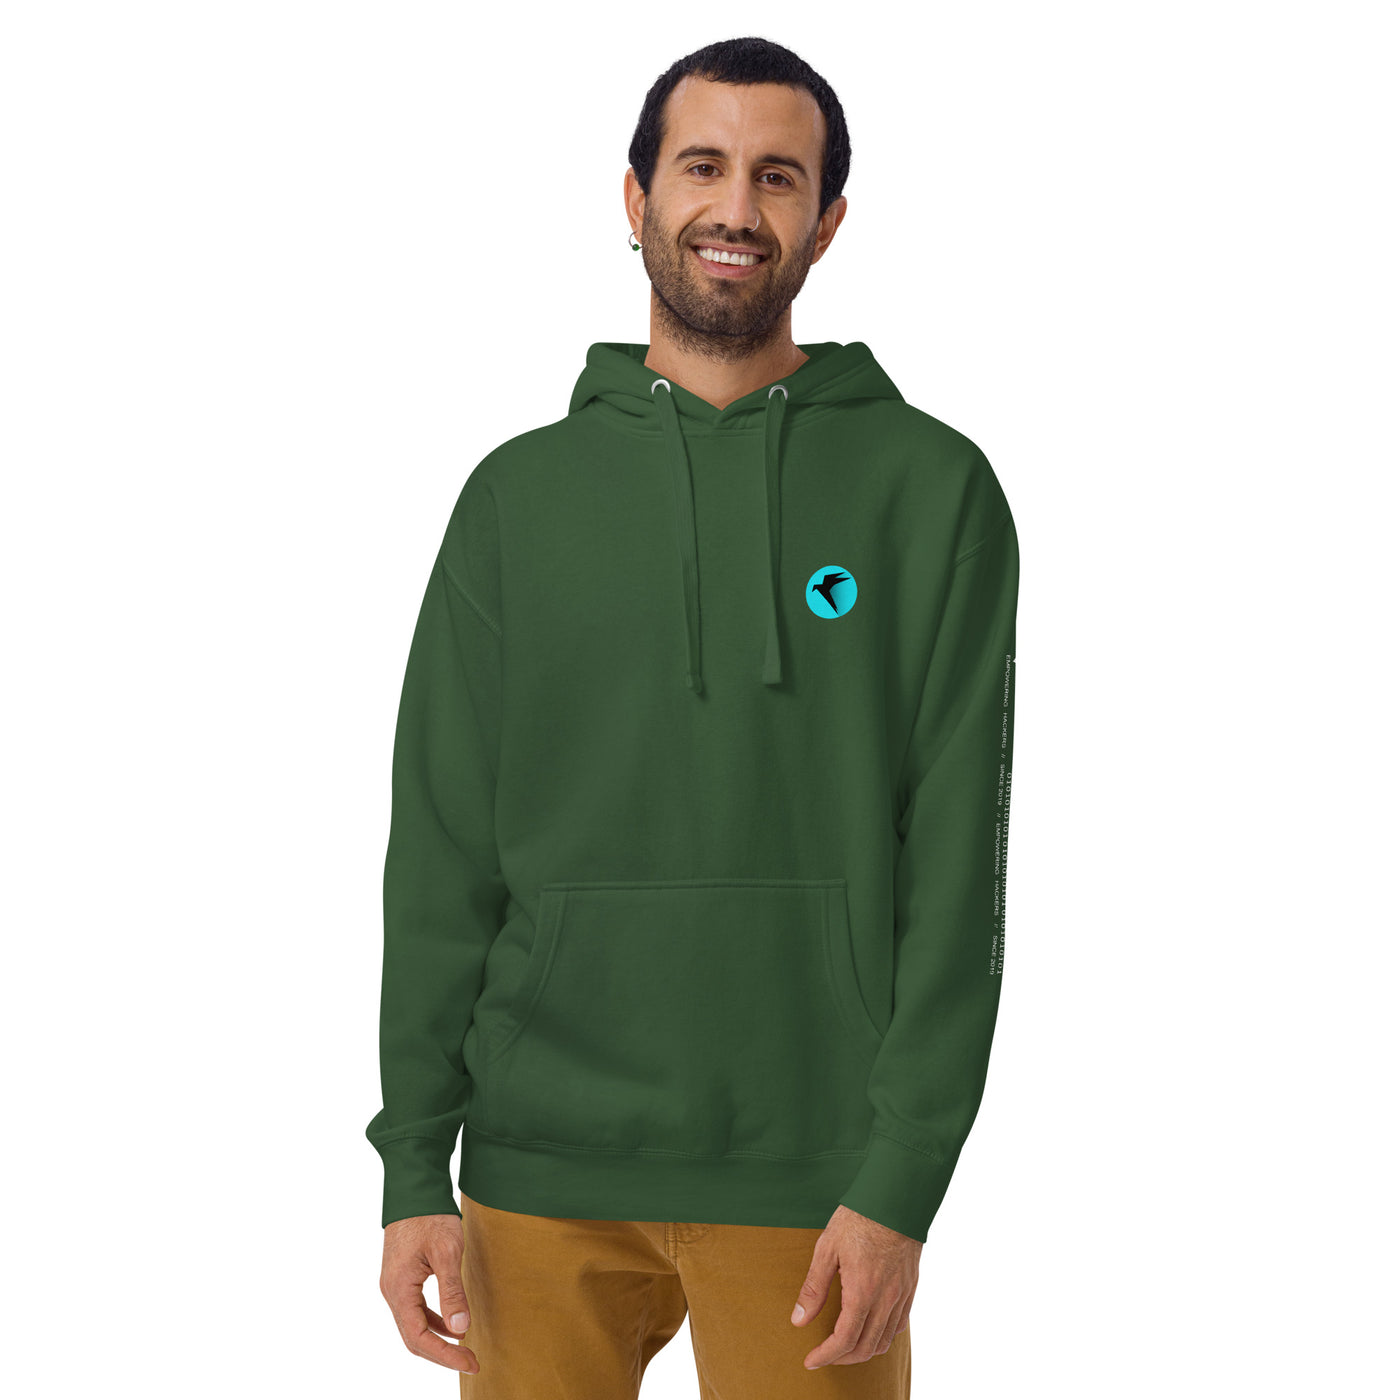 Parrot OS - The operating system for Hackers - Unisex Hoodie